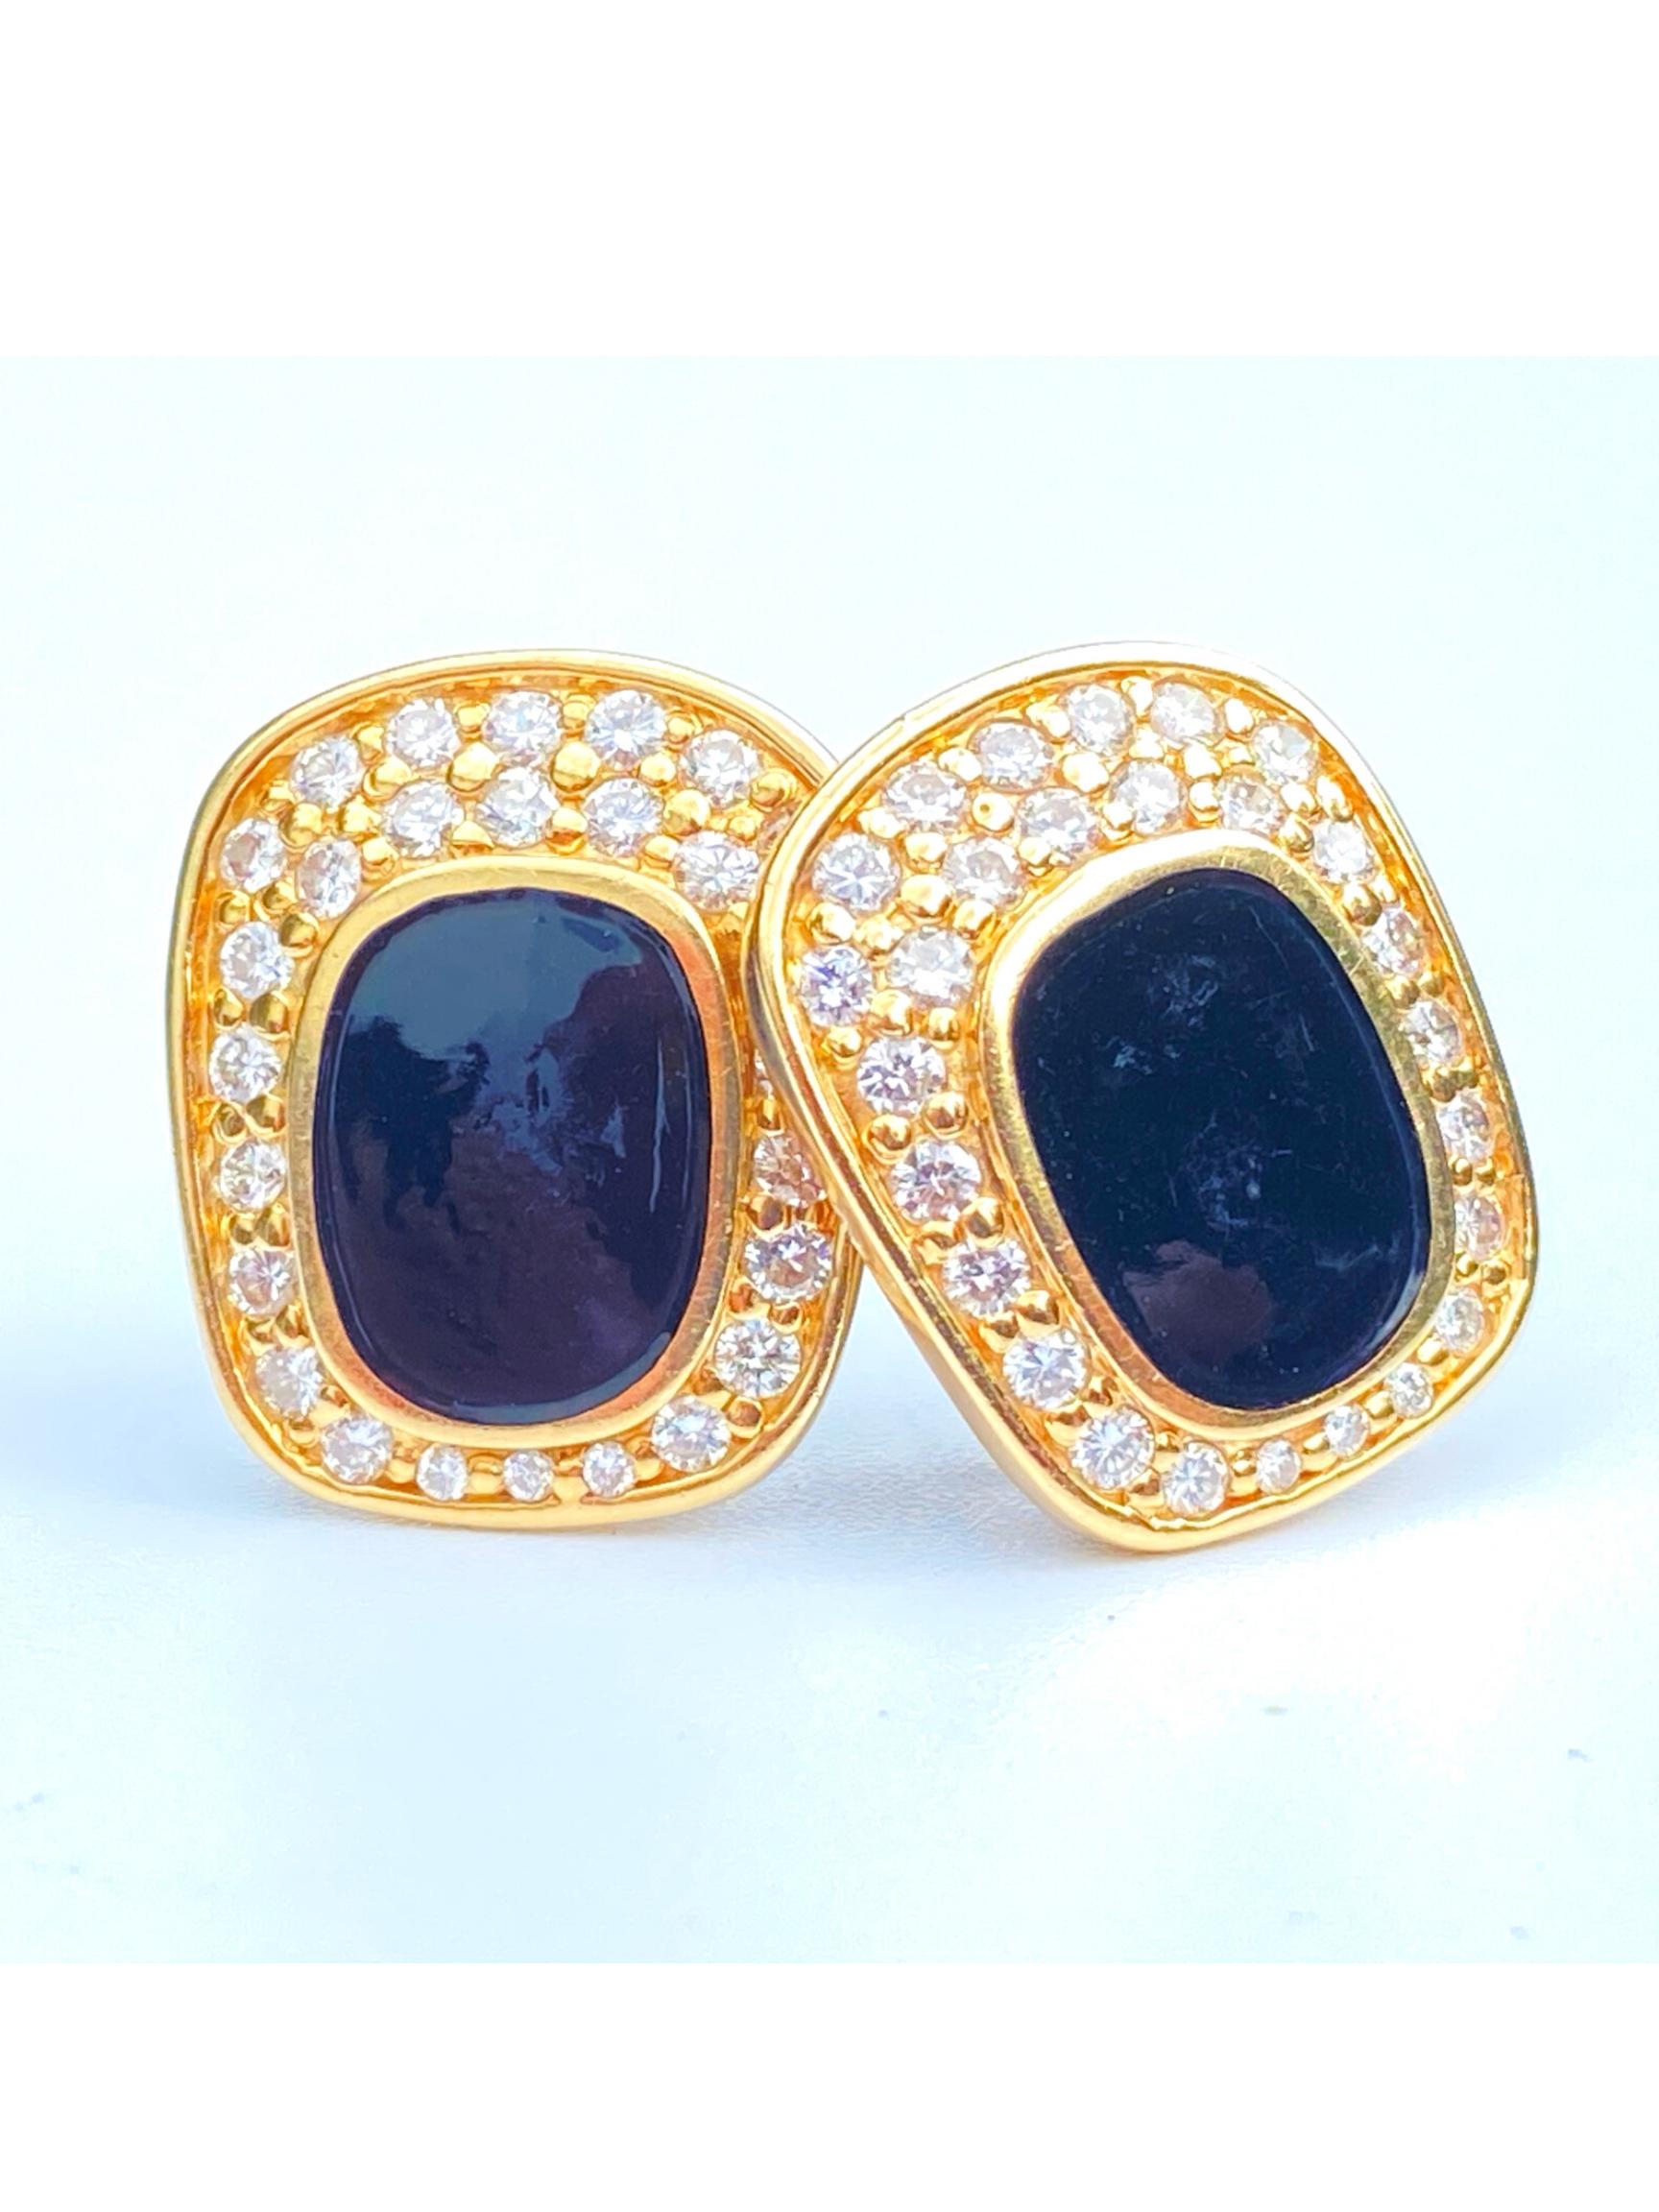 Centering lovely Oval-Cut Black Onyx, framed by 53 Round-Brilliant Cut Diamonds, and set in 14.4 grams of 14K Yellow Gold.

Details:
✔ Stone: Black Onyx
✔ Stone Cut: Oval
✔ Stone Color: Black
✔ Earrings: 14K, 53 Round-Brilliant Cut Diamonds
✔ Era: